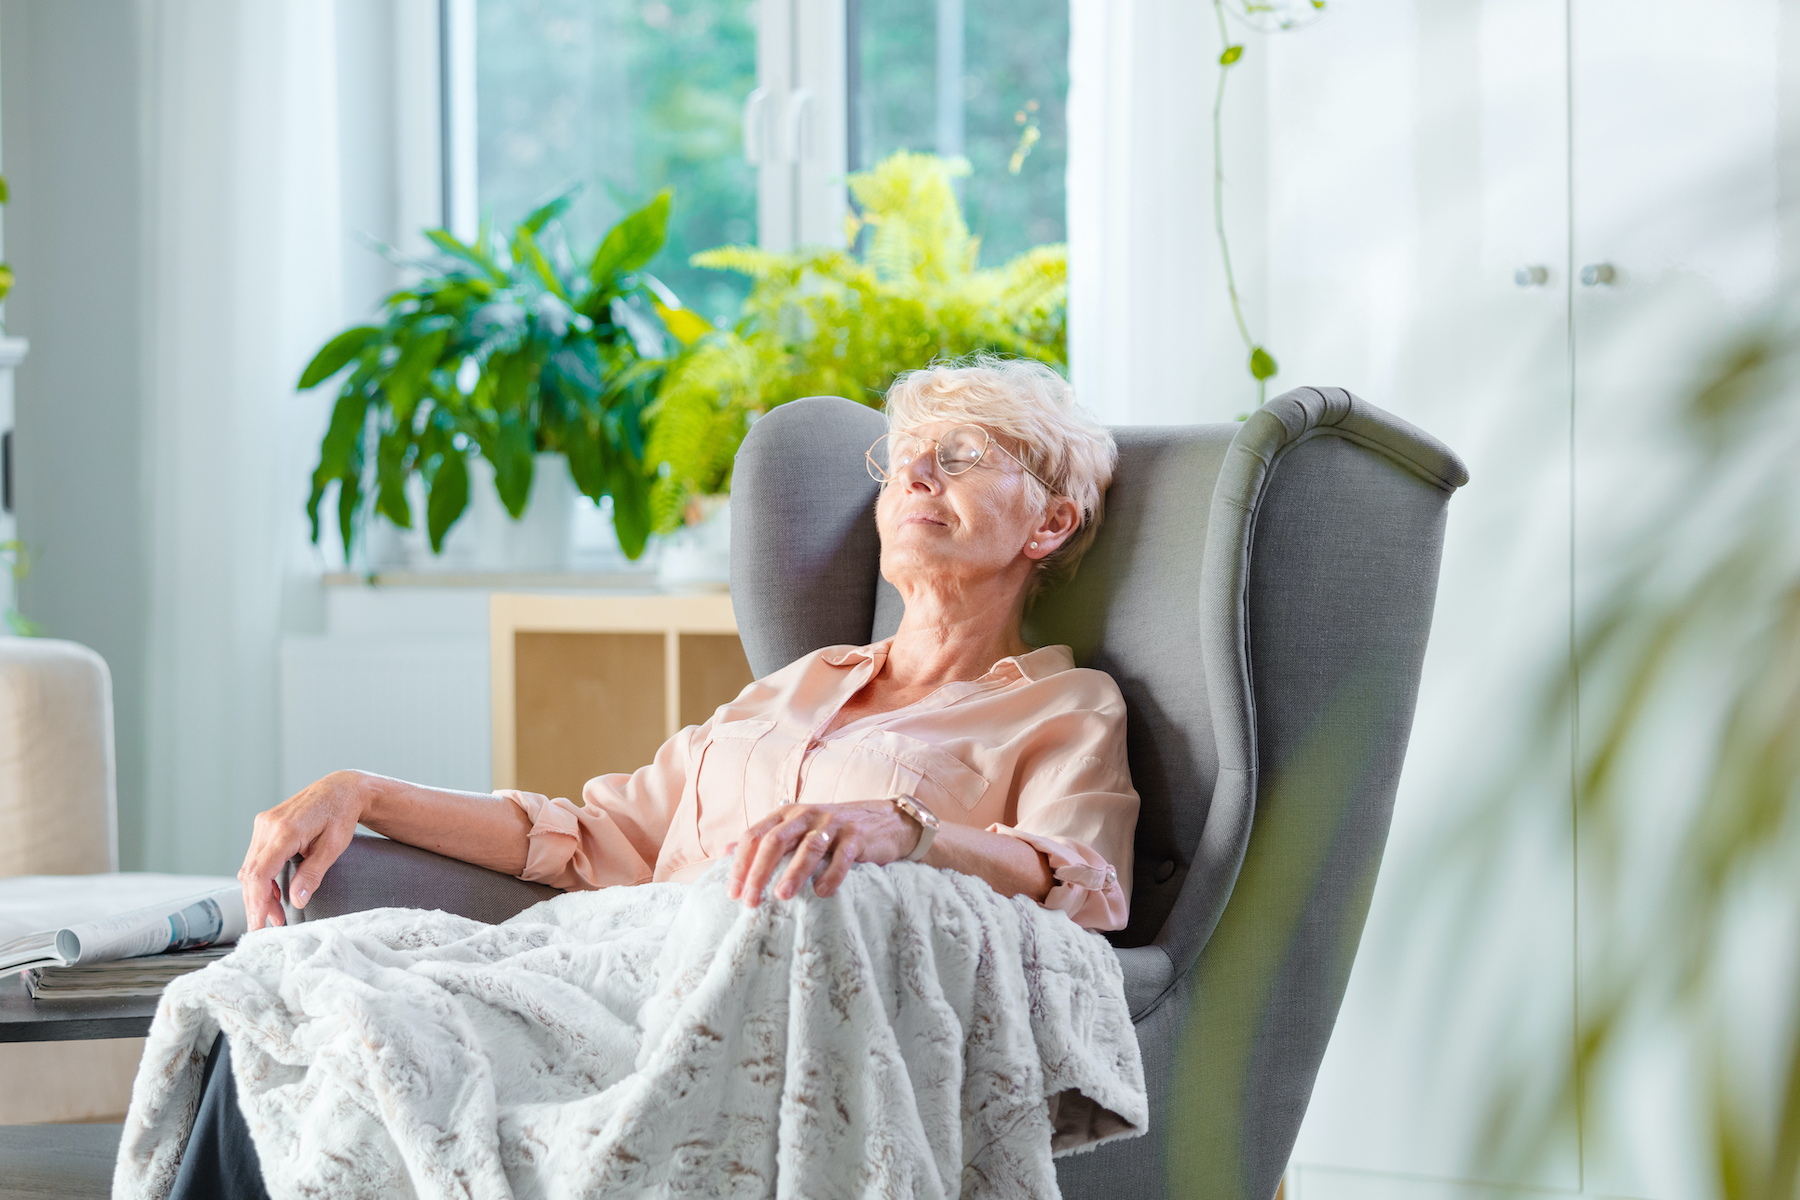 Senior woman resting in chair